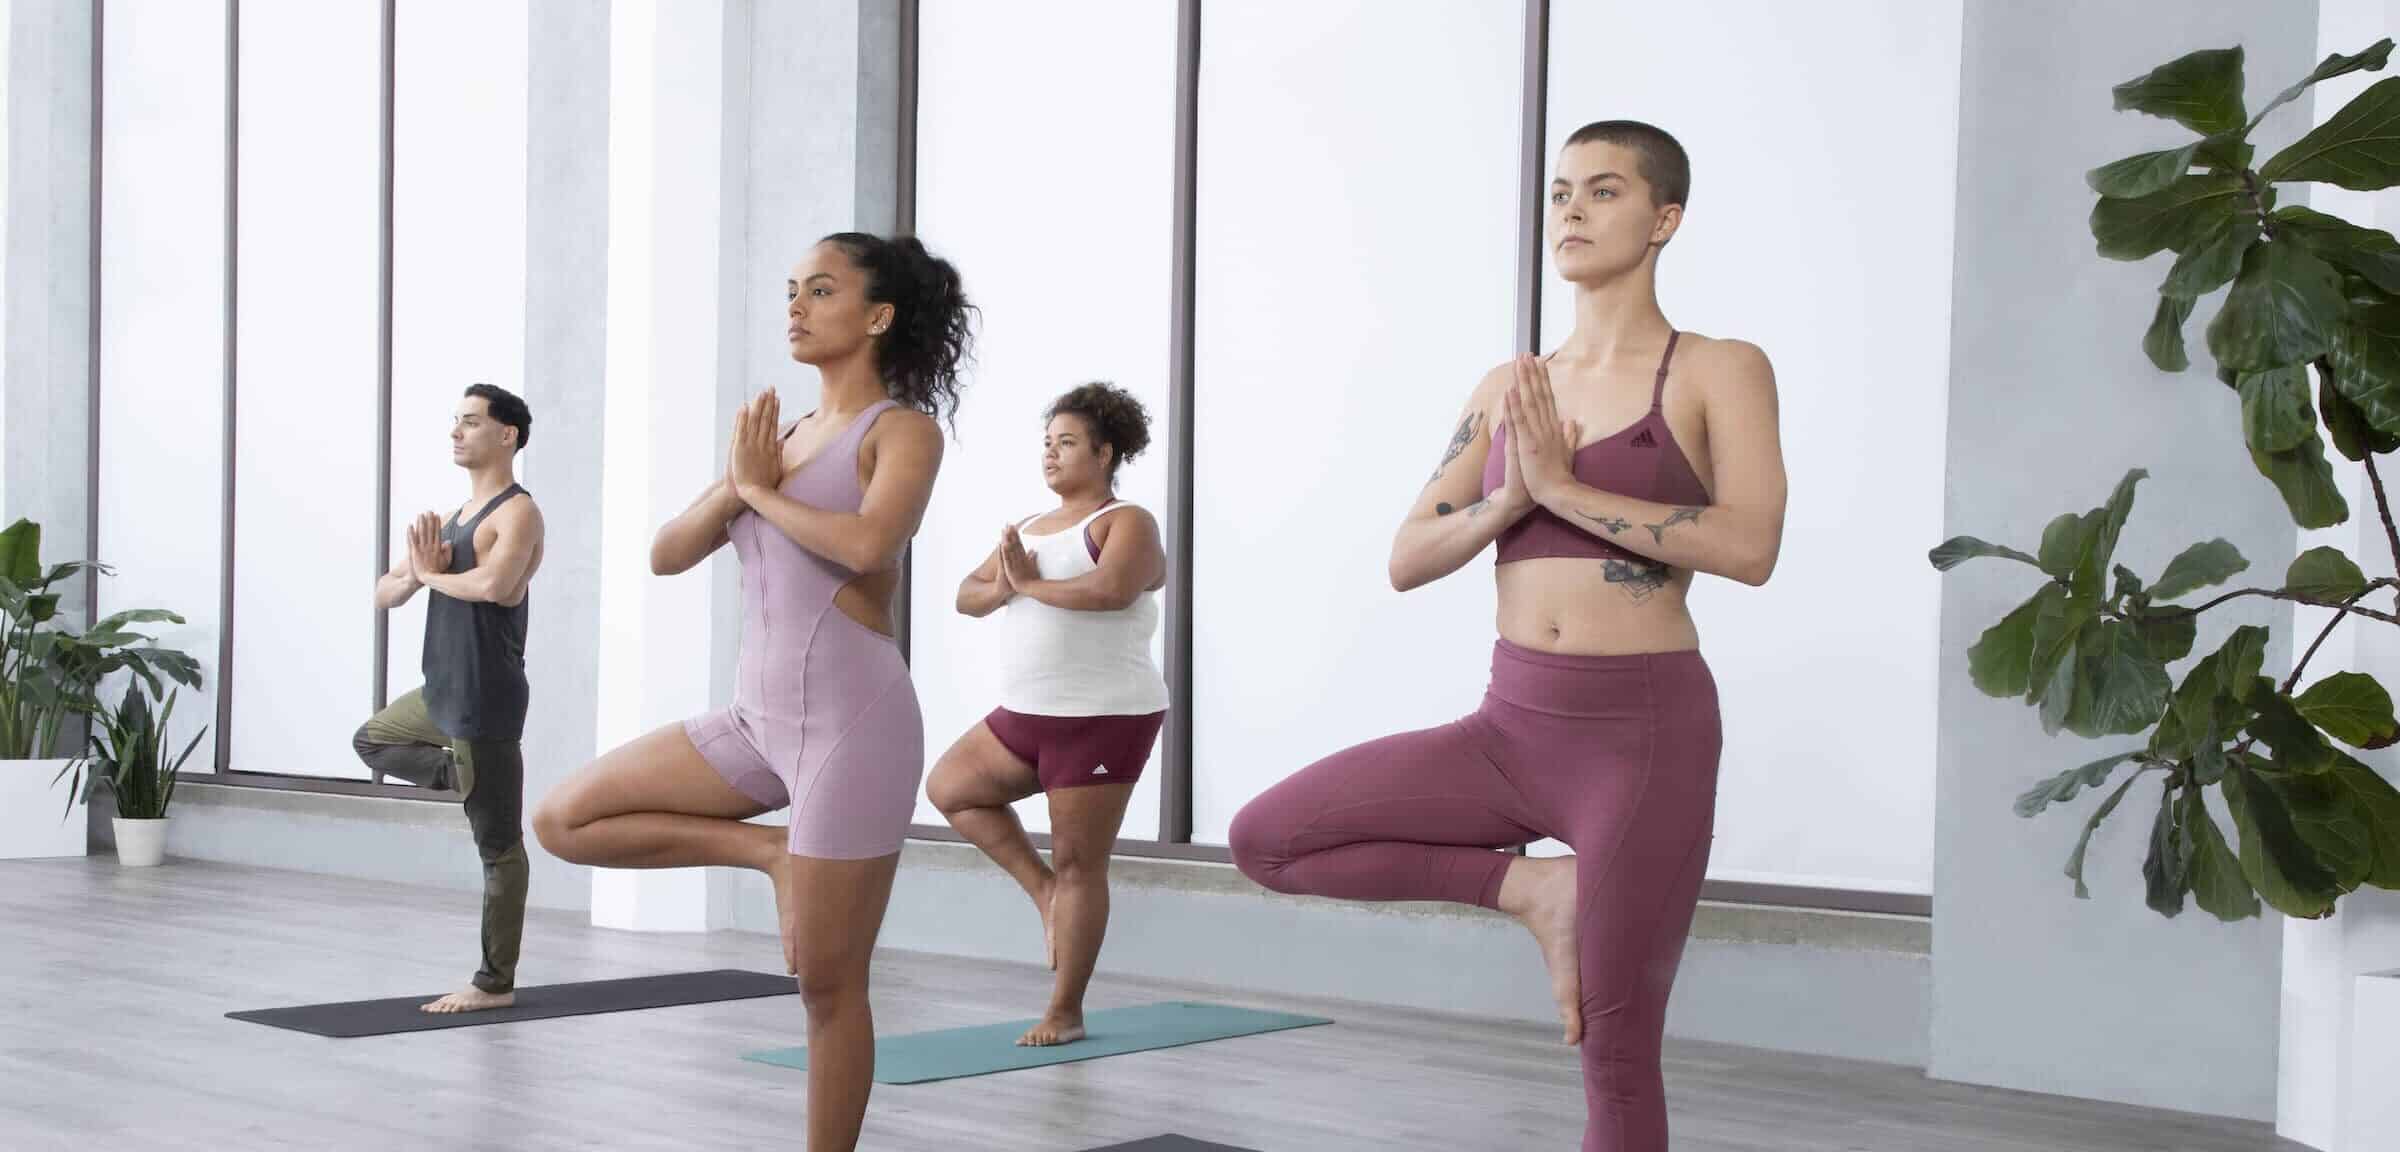 adidas Celebrates Yoga Is For All, In SS22 Campaign Featuring Paulo Dybala, Deepika Padukone And Adriene Mishler